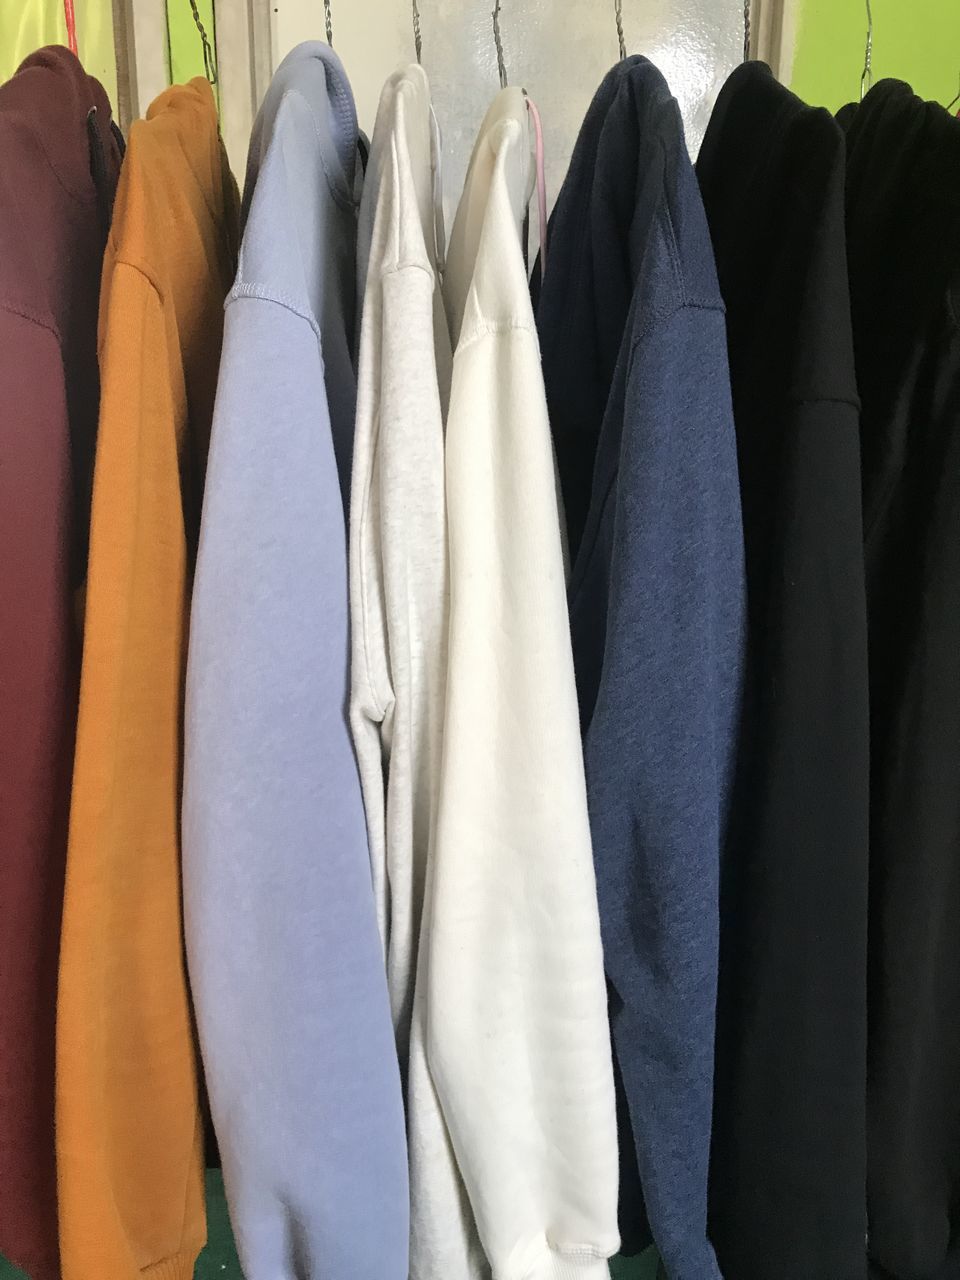 MIDSECTION OF CLOTHES HANGING ON RACK